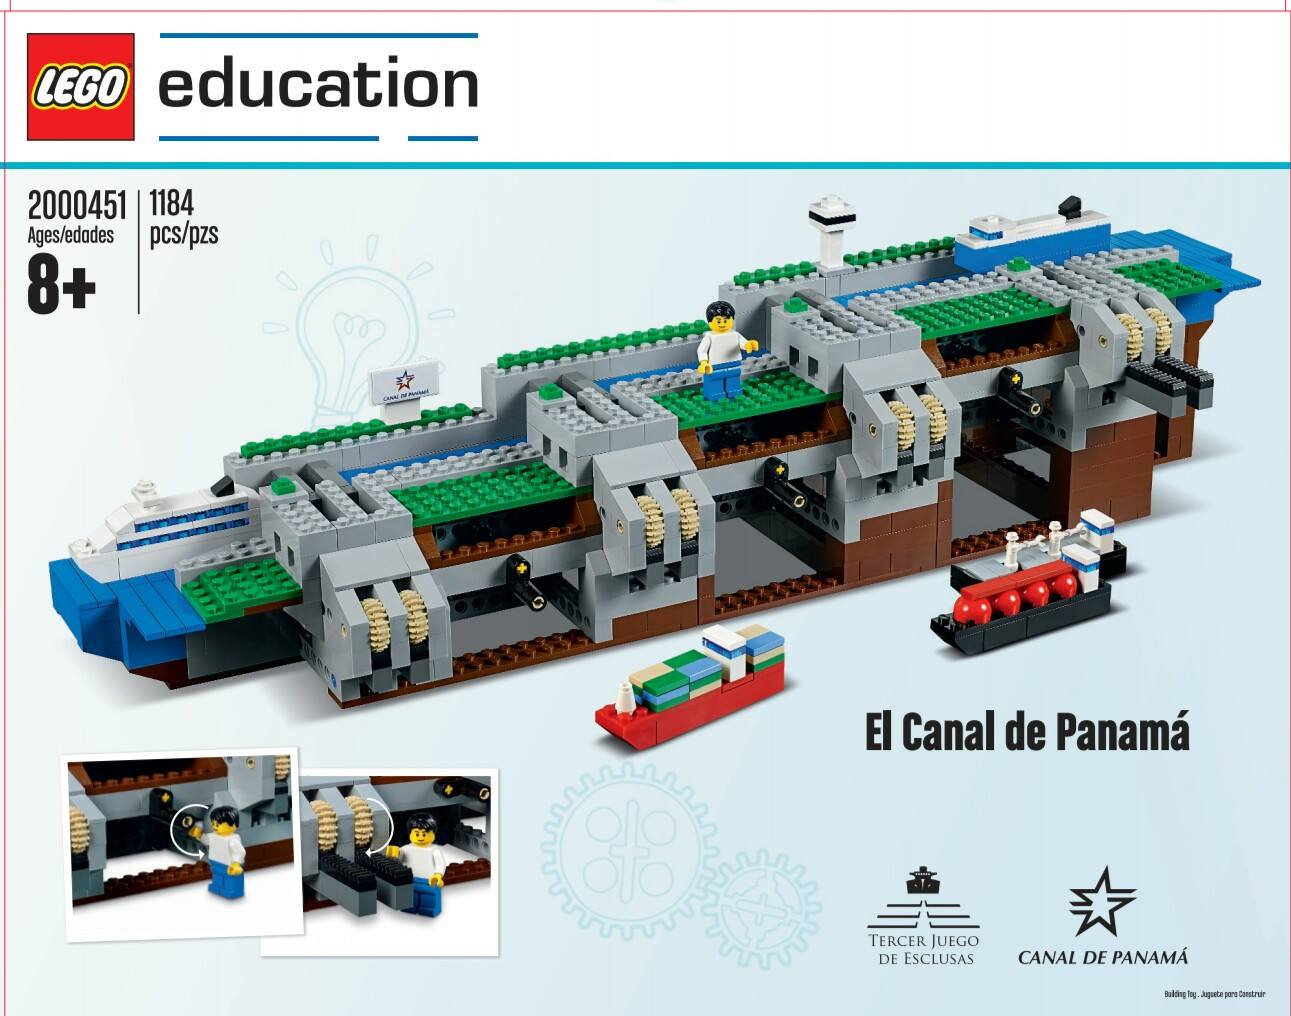 LEGO Made A Miniature Working Version Of The Panama Canal